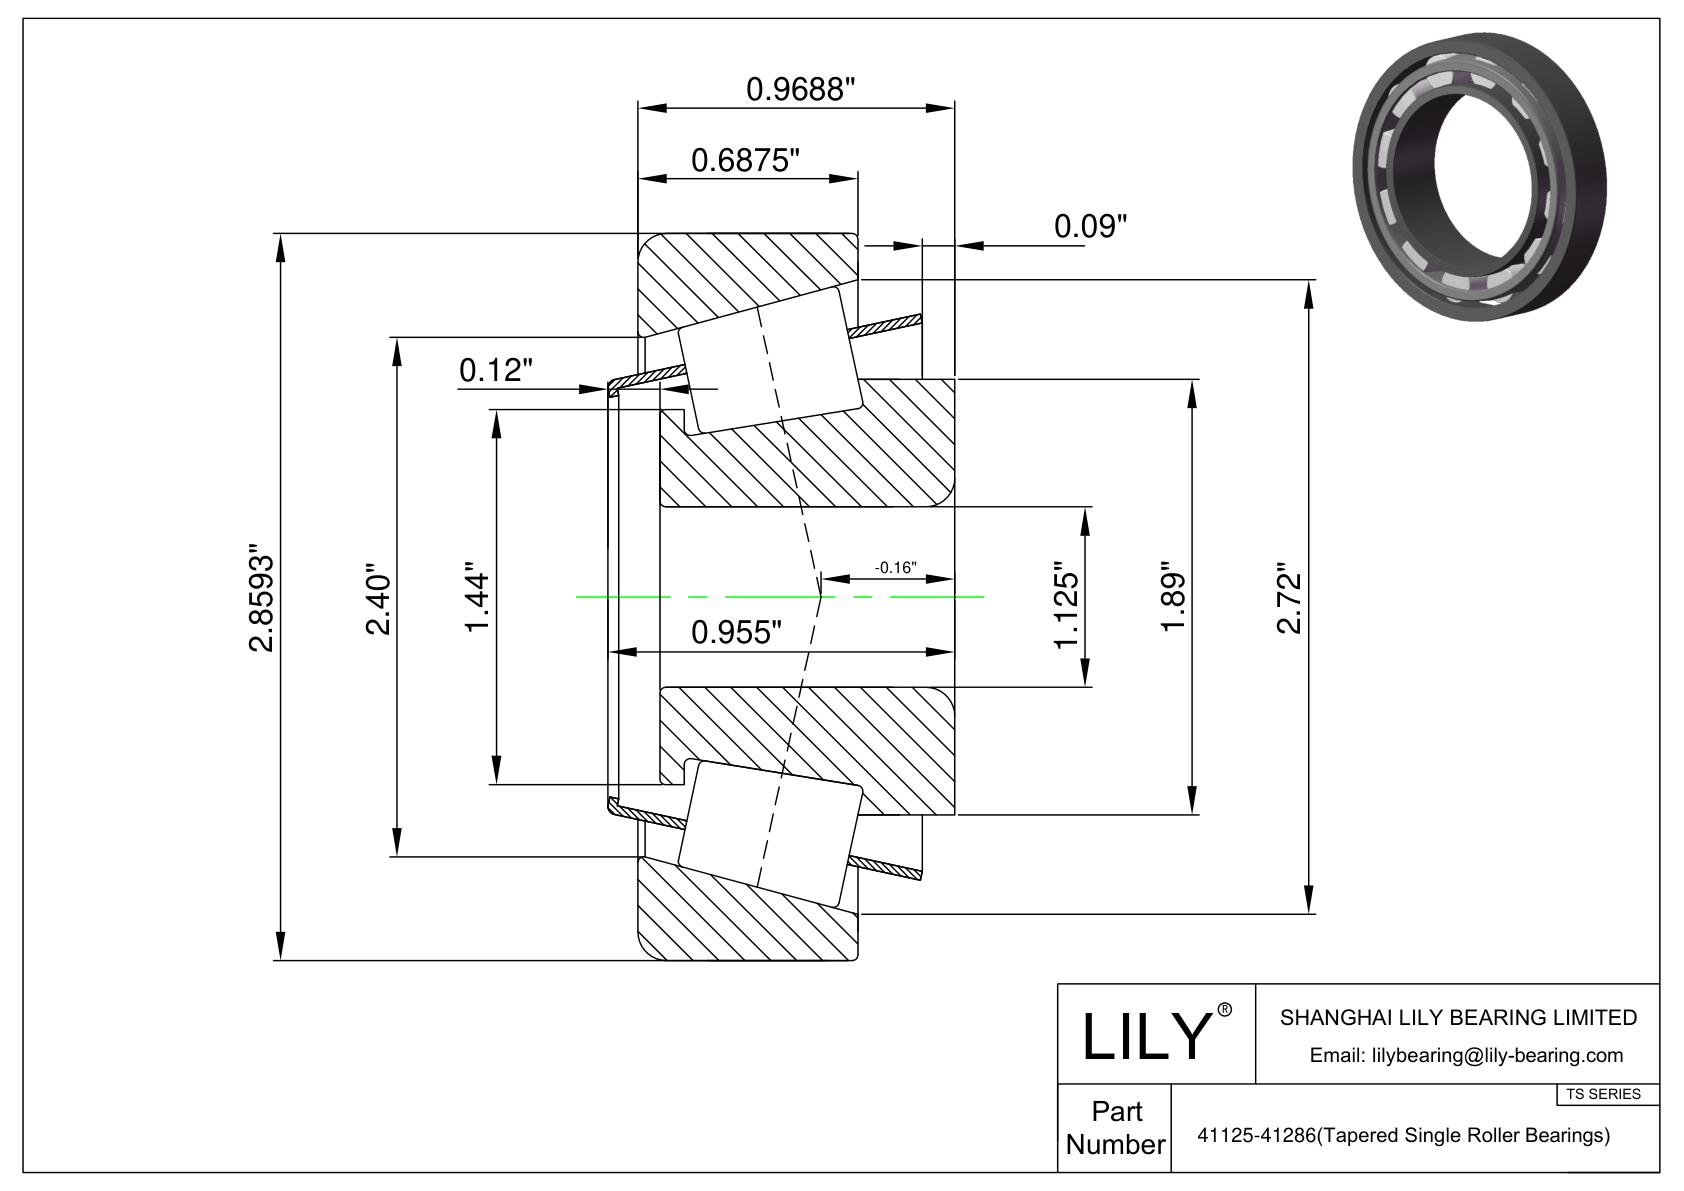 41125-41286 TS (Tapered Single Roller Bearings) (Imperial) cad drawing